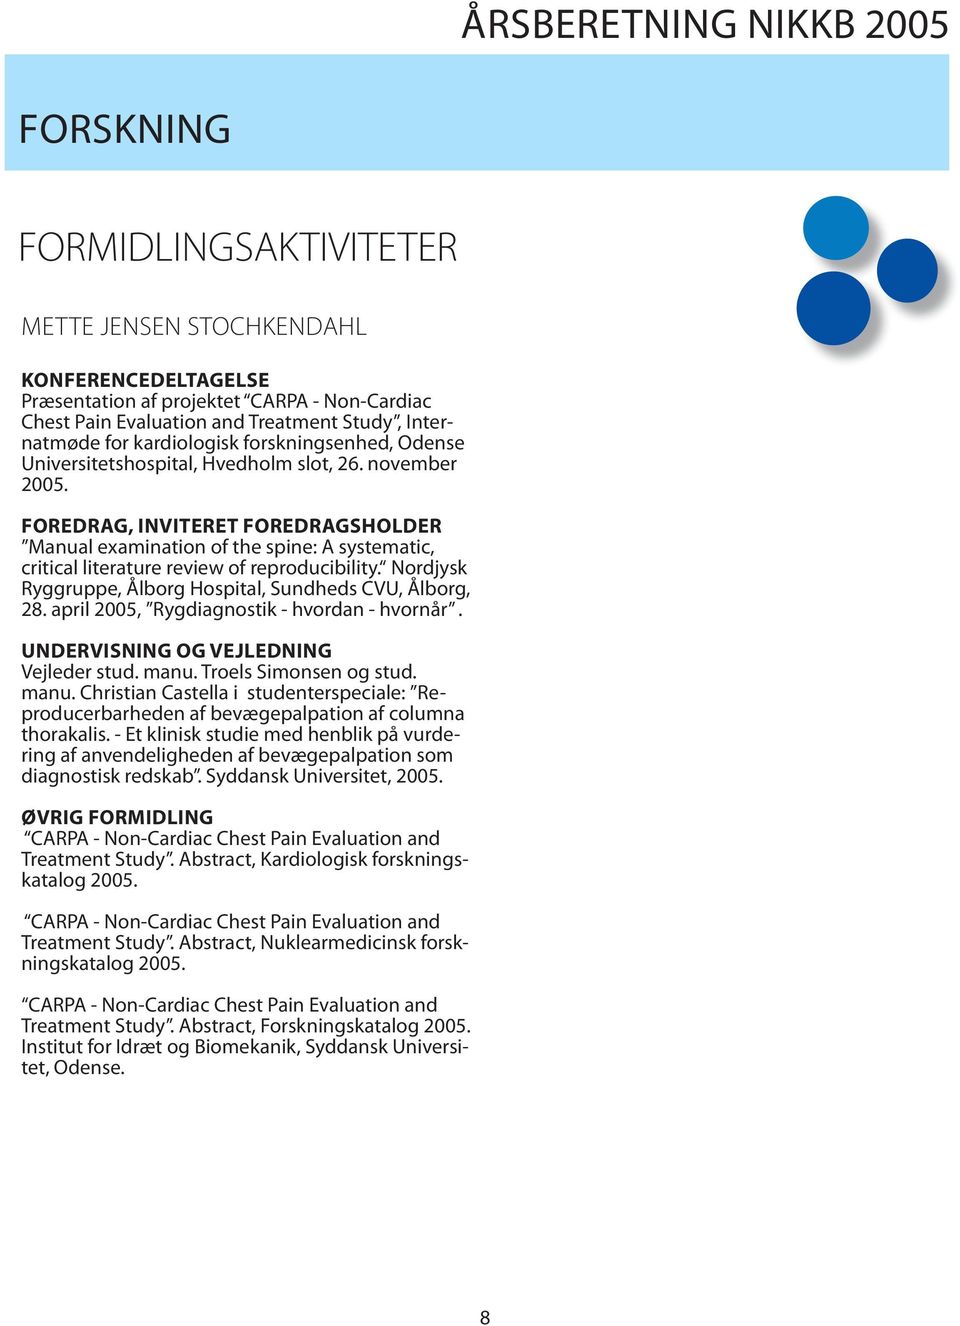 FOREDRAG, INVITERET FOREDRAGSHOLDER Manual examination of the spine: A systematic, critical literature review of reproducibility. Nordjysk Ryggruppe, Ålborg Hospital, Sundheds CVU, Ålborg, 28.